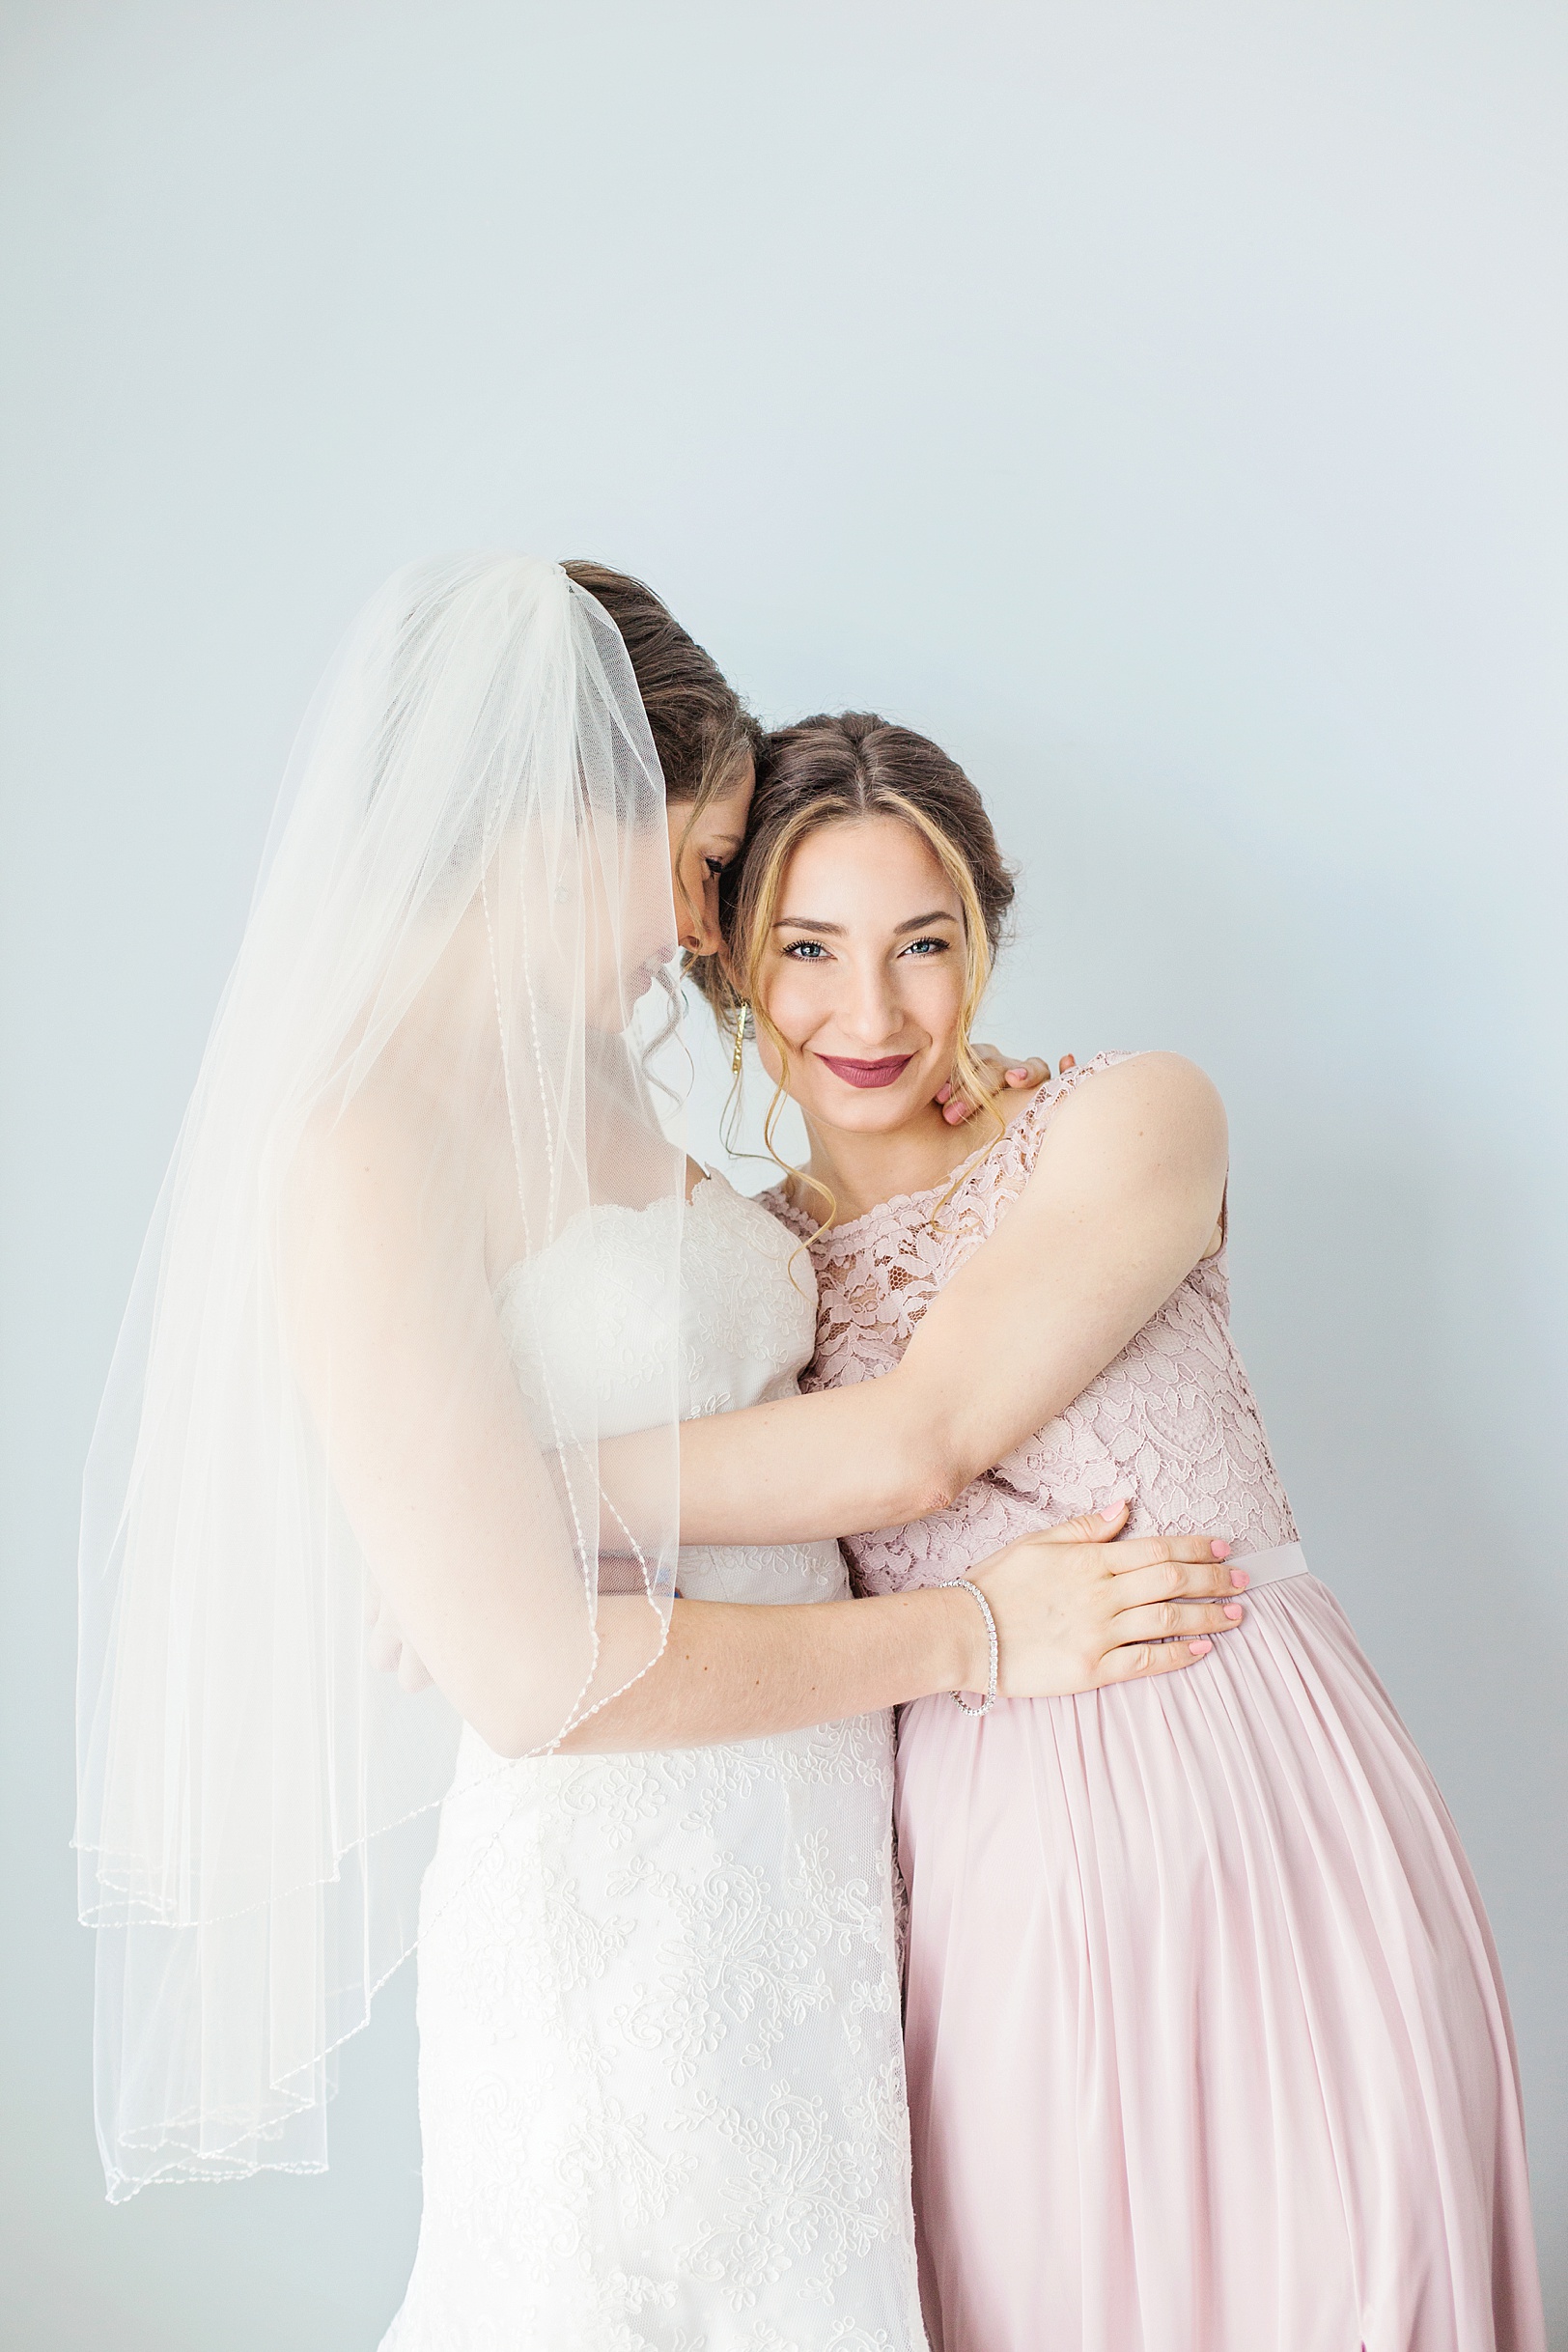 Maid of Honor hugging Sister on her Wedding Day | Kaitlin Scott Photography